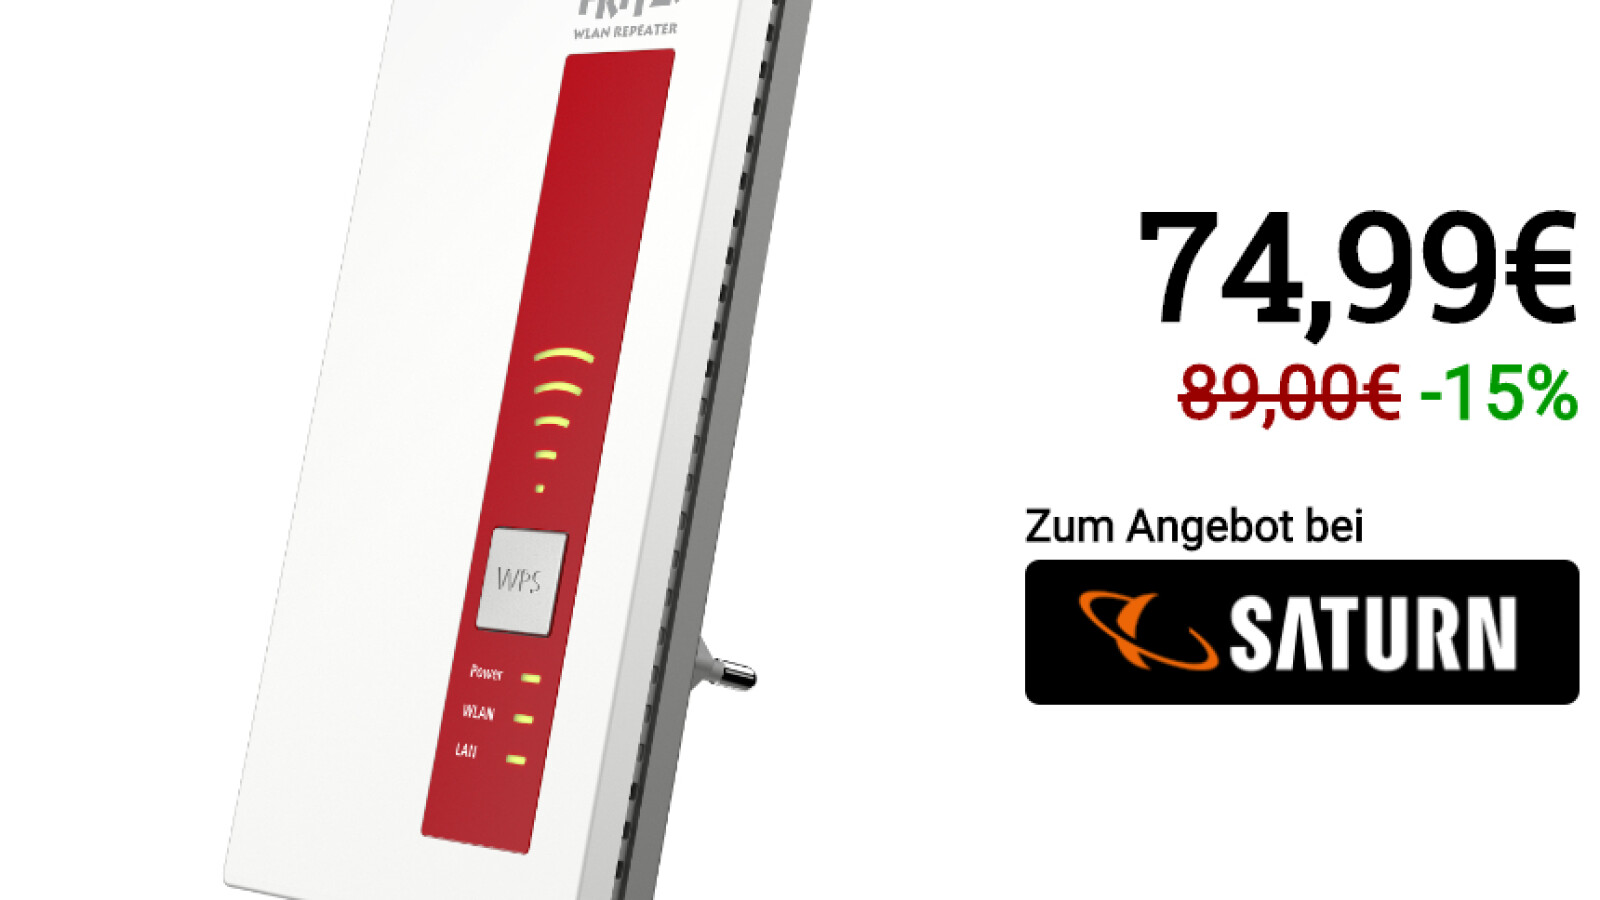 Saturn Quote Avm Fritz Wlan Repeater 1750e 15 Euros Cheaper Igamesnews